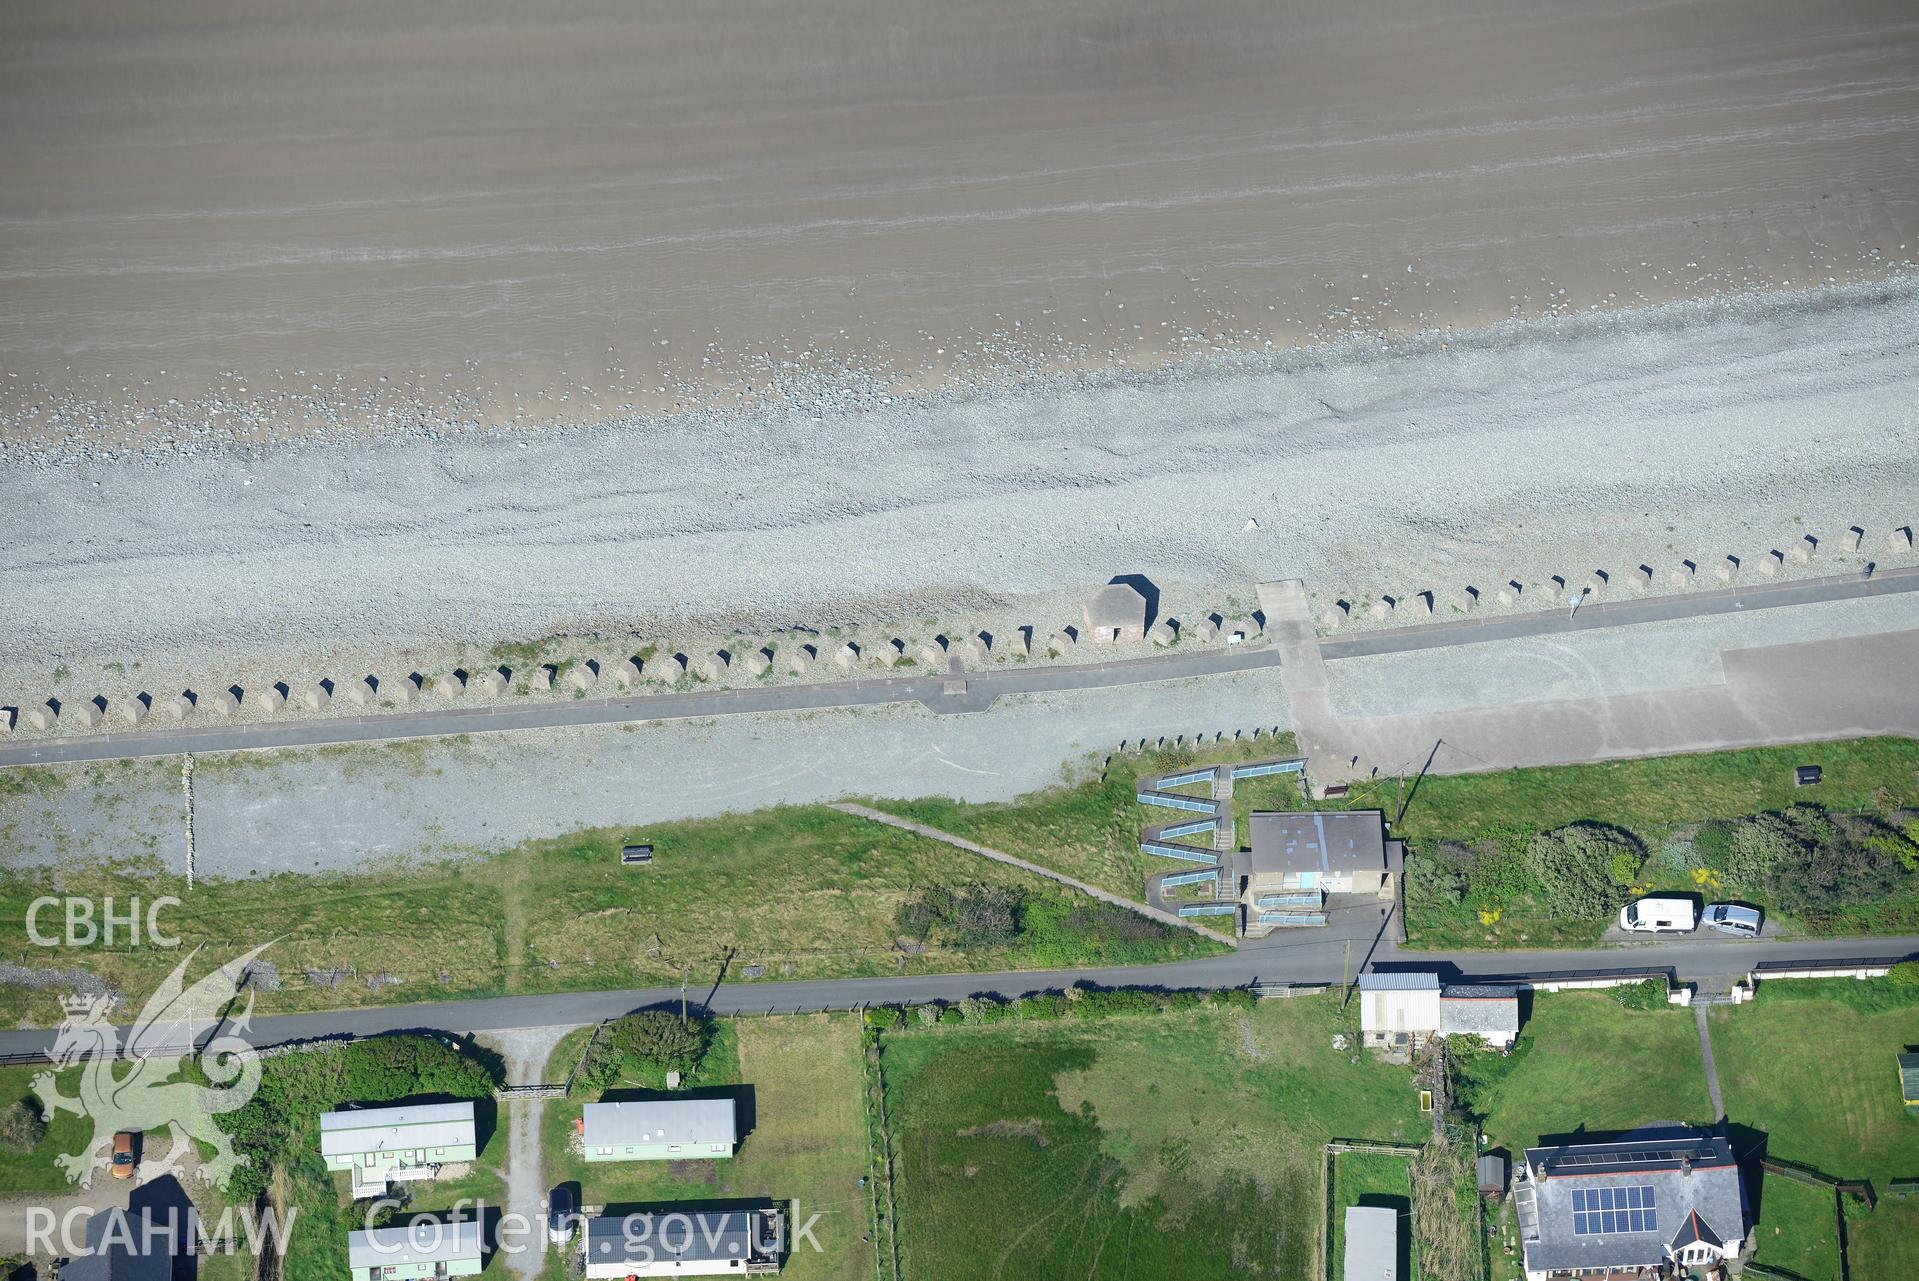 Aerial photography of Fairbourne anti-invasion defences taken on 3rd May 2017.  Baseline aerial reconnaissance survey for the CHERISH Project. ? Crown: CHERISH PROJECT 2017. Produced with EU funds through the Ireland Wales Co-operation Programme 2014-2020. All material made freely available through the Open Government Licence.